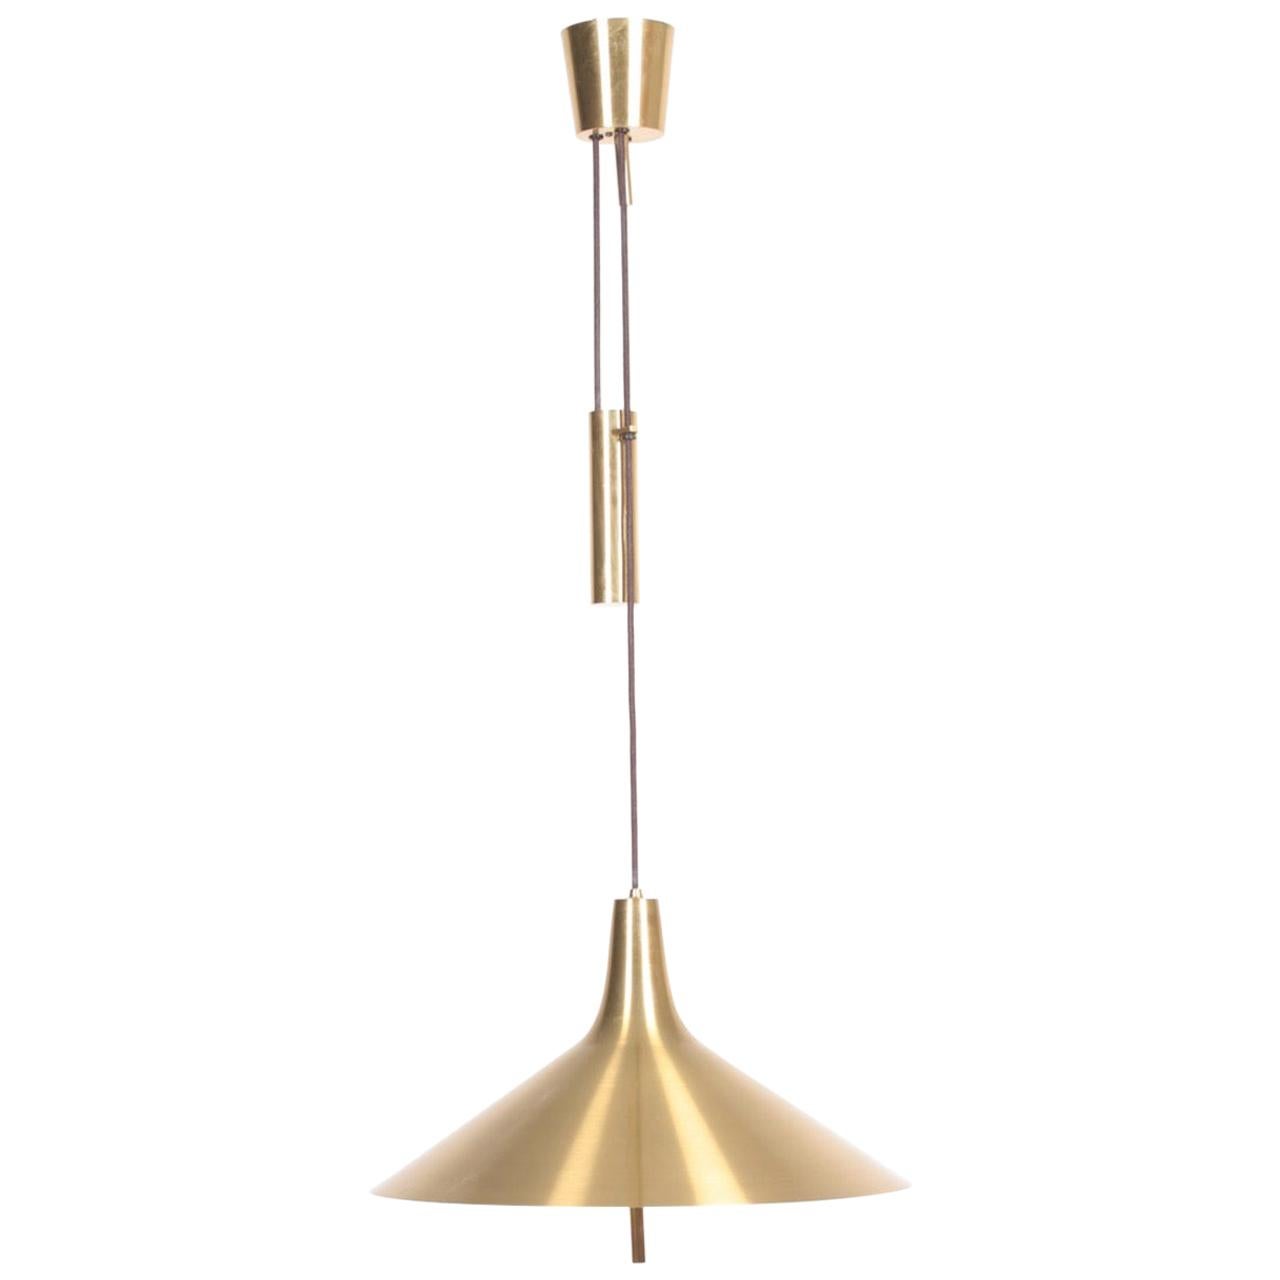 Midcentury Ceiling Lamp in Brass by T.H. Valentiner, 1960s